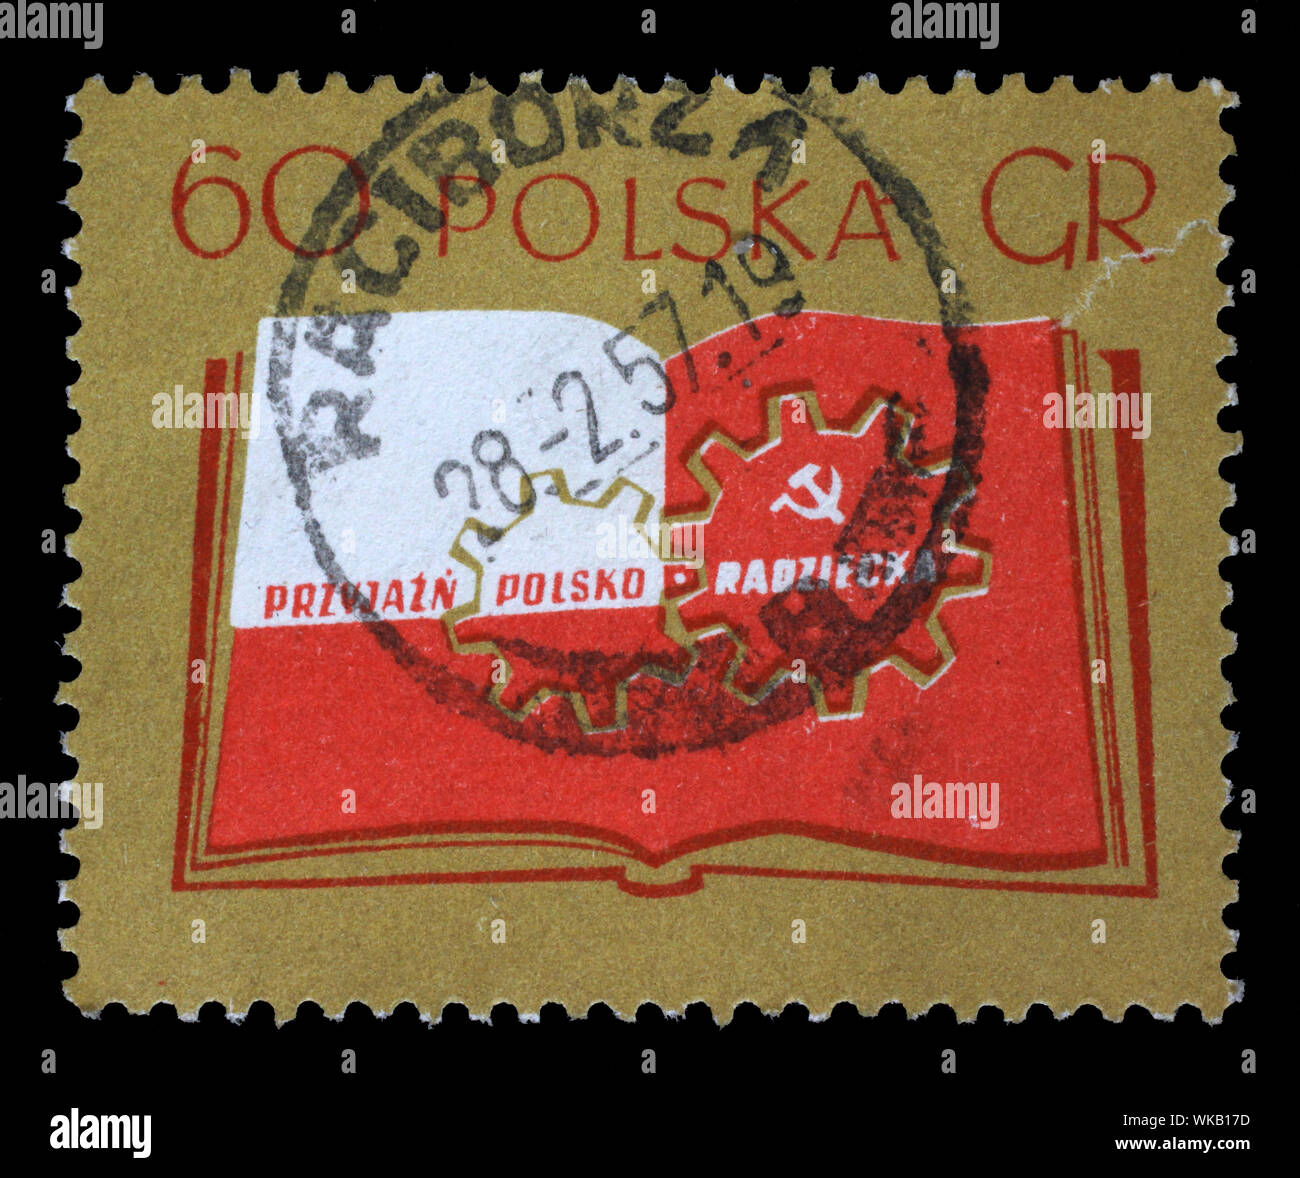 Stamp printed in Poland shows Open book and cogwheels, Polish-Soviet friendship, circa 1956. Stock Photo